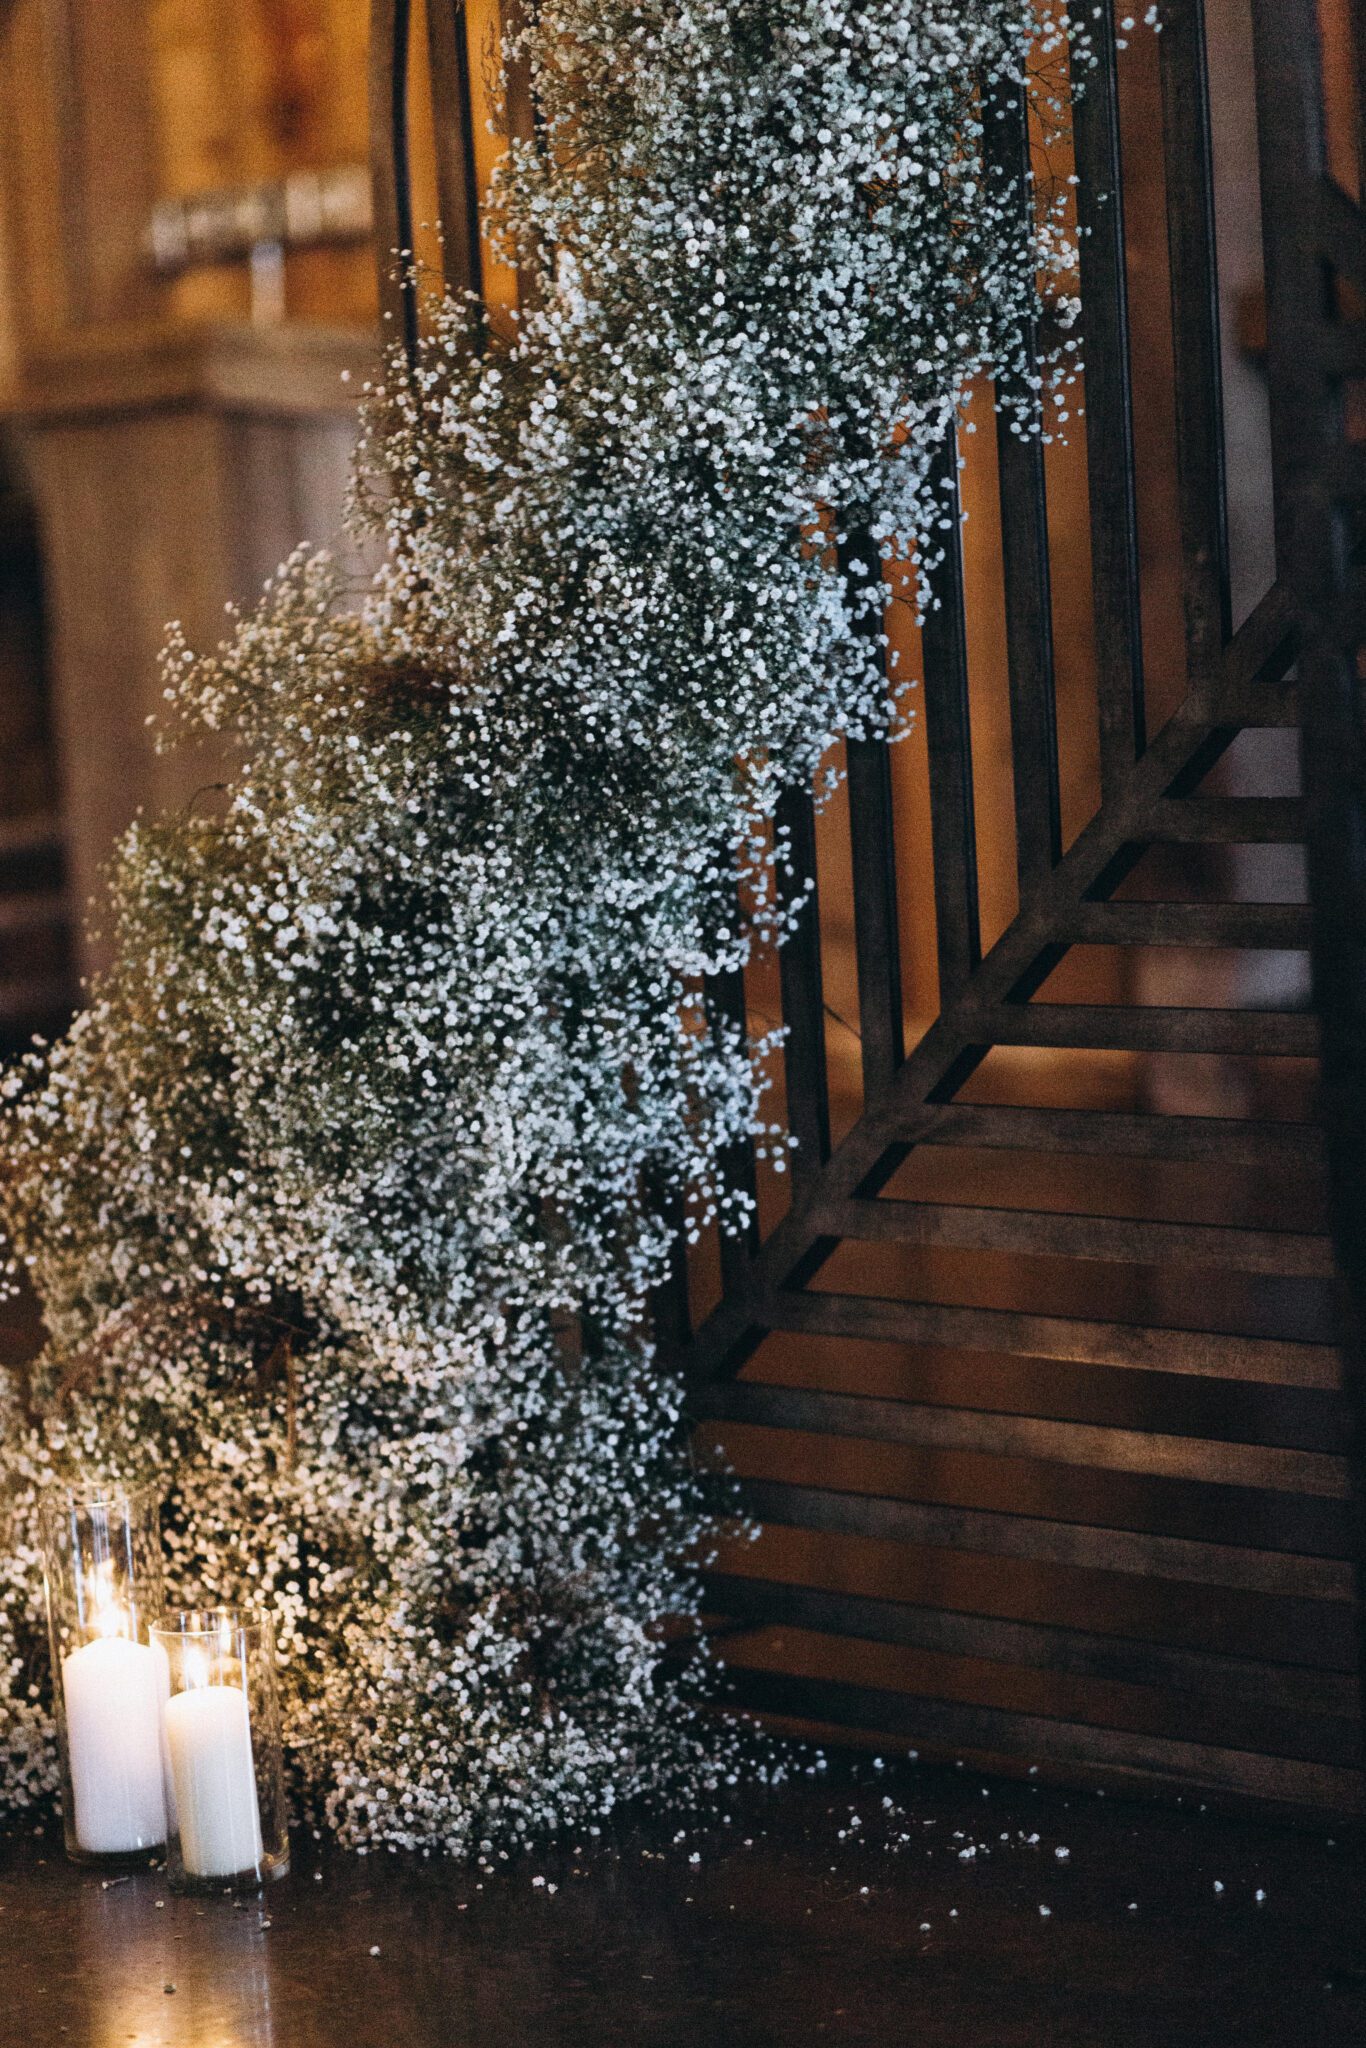 Modern whimsical baby's breath installation for the ceremony arch at this Country Chic wedding, paired with romantic candlelight for a warm cozy winter wedding ceremony.